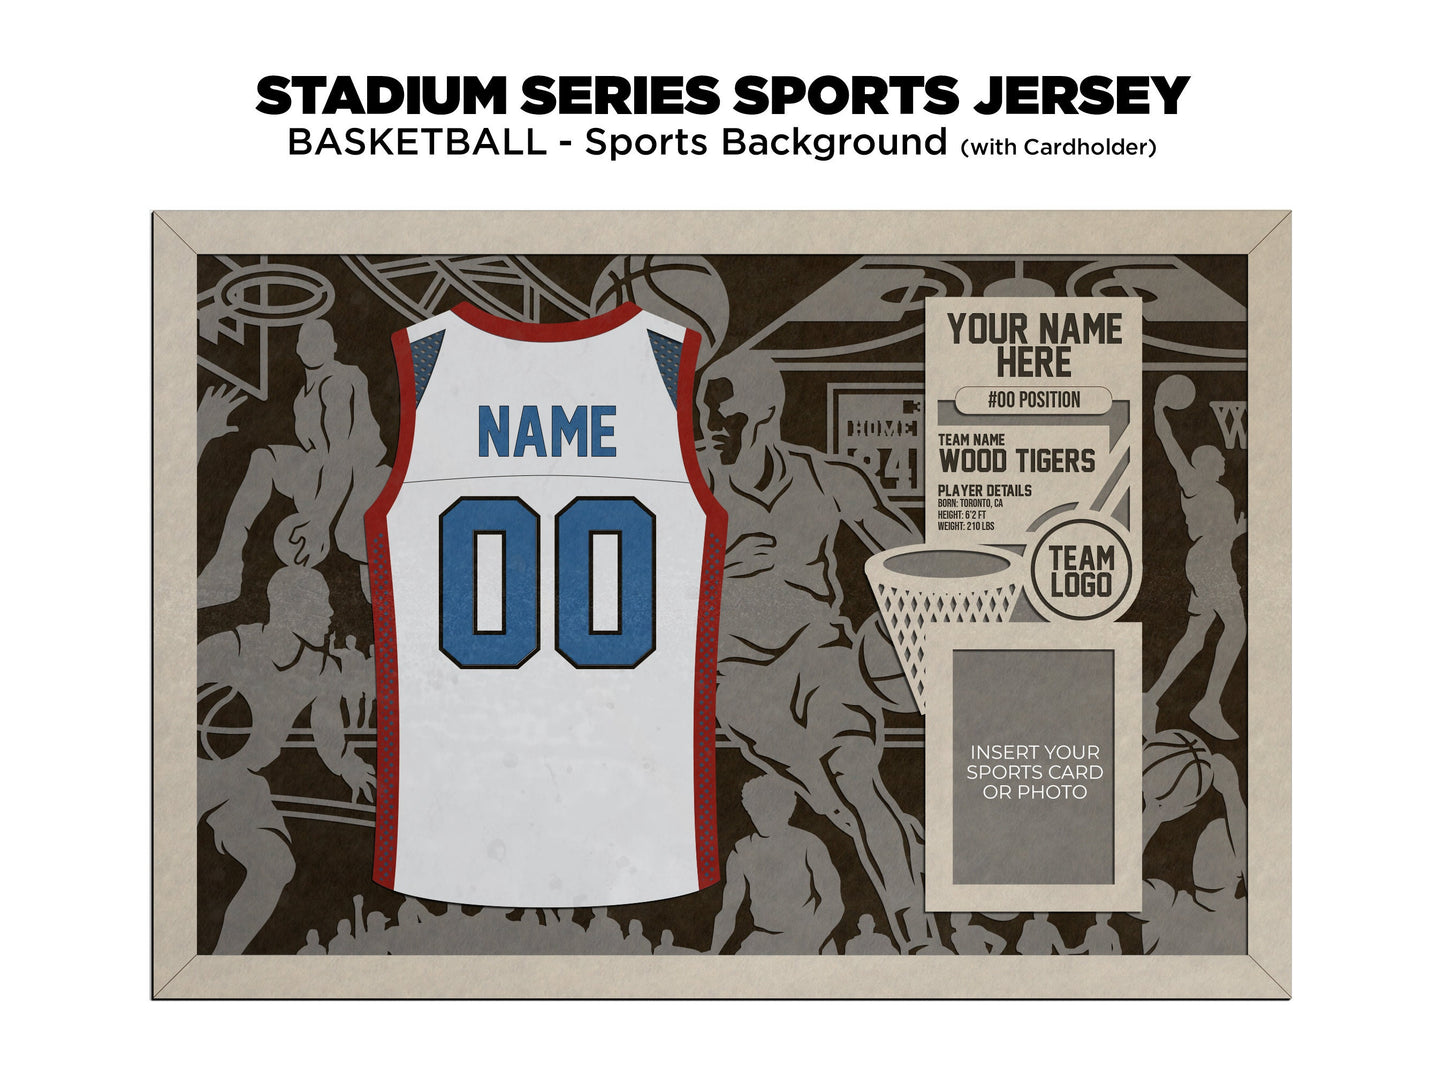 Stadium Series Jerseys - Basketball - 3 Variations - Male, Female & Alternate Backgrounds - SVG File Download - Sized for Glowforge